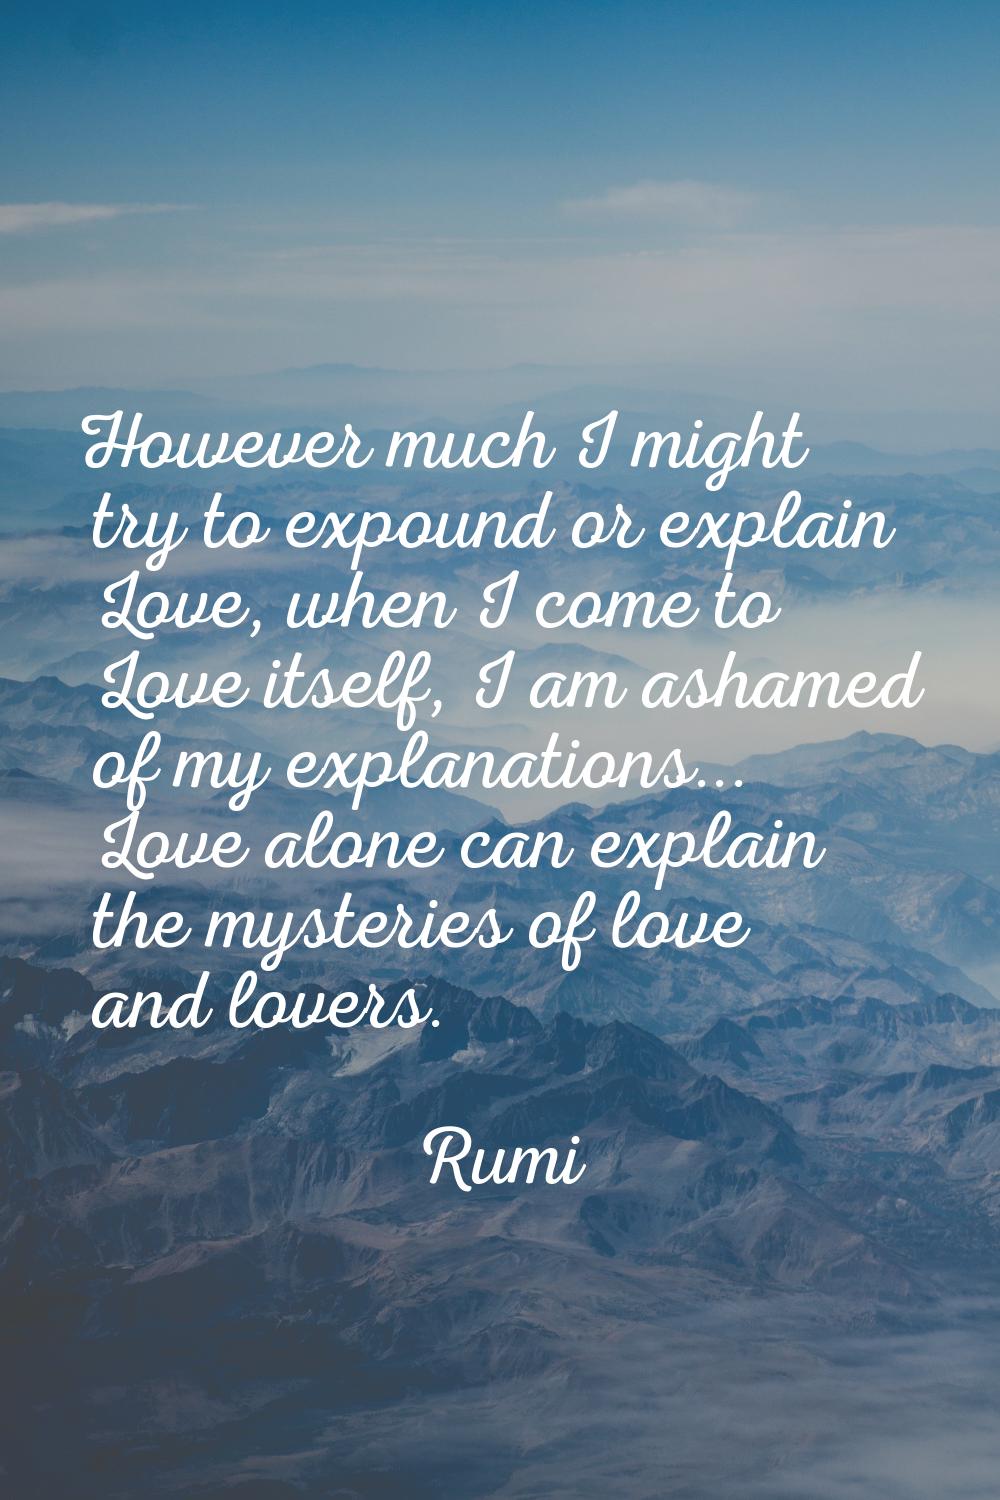 However much I might try to expound or explain Love, when I come to Love itself, I am ashamed of my